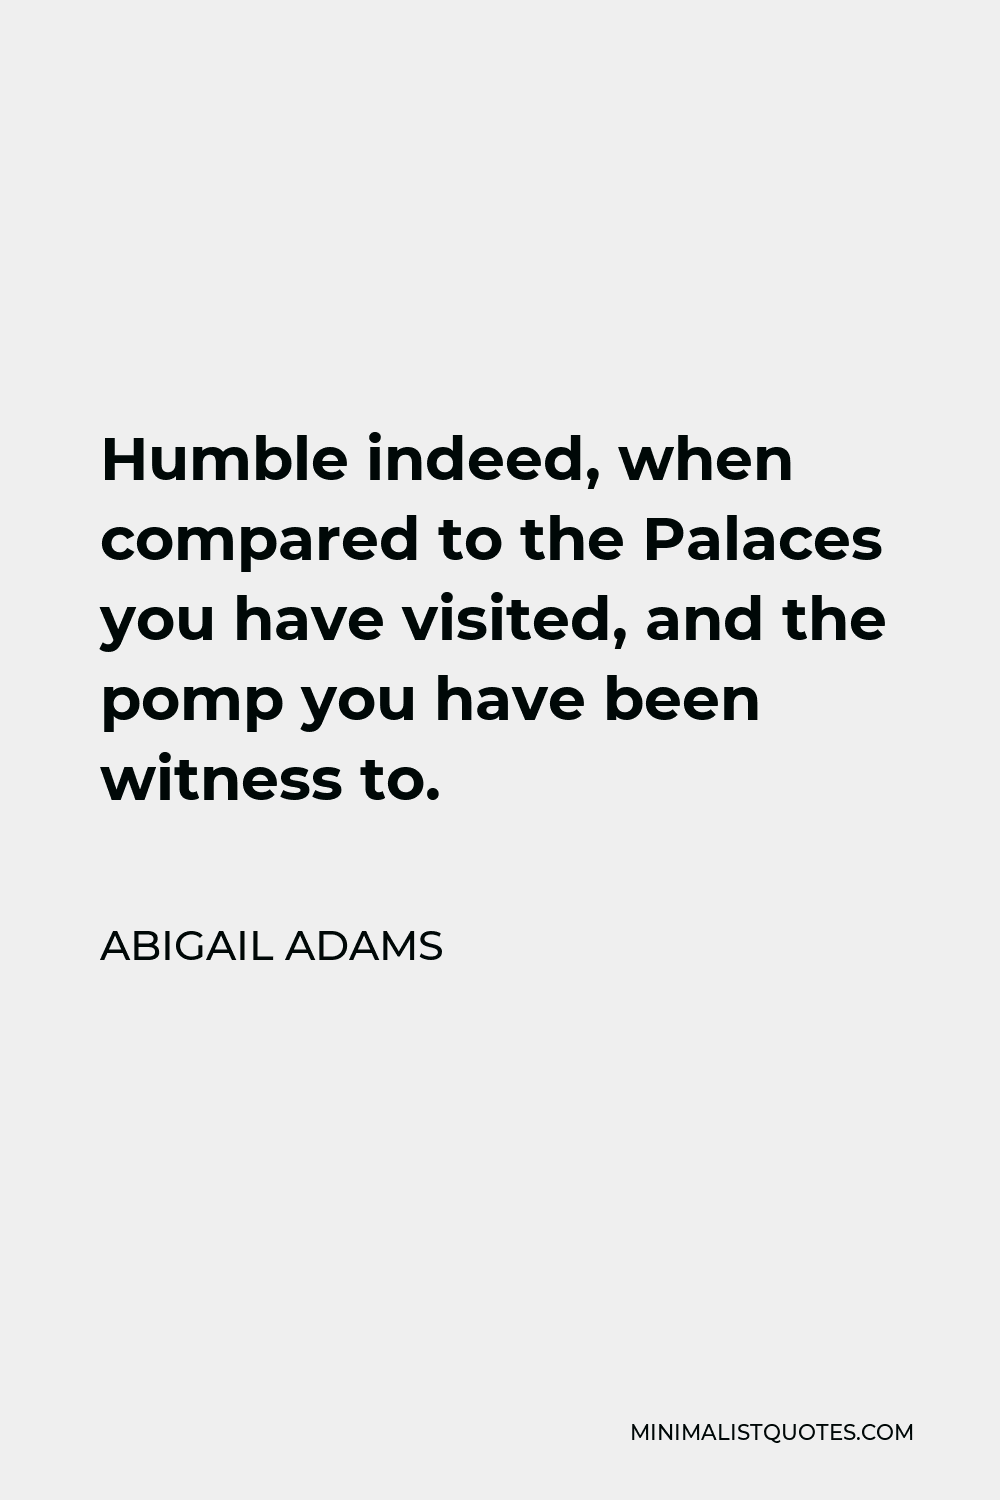 Abigail Adams Quote - Humble indeed, when compared to the Palaces you have visited, and the pomp you have been witness to.